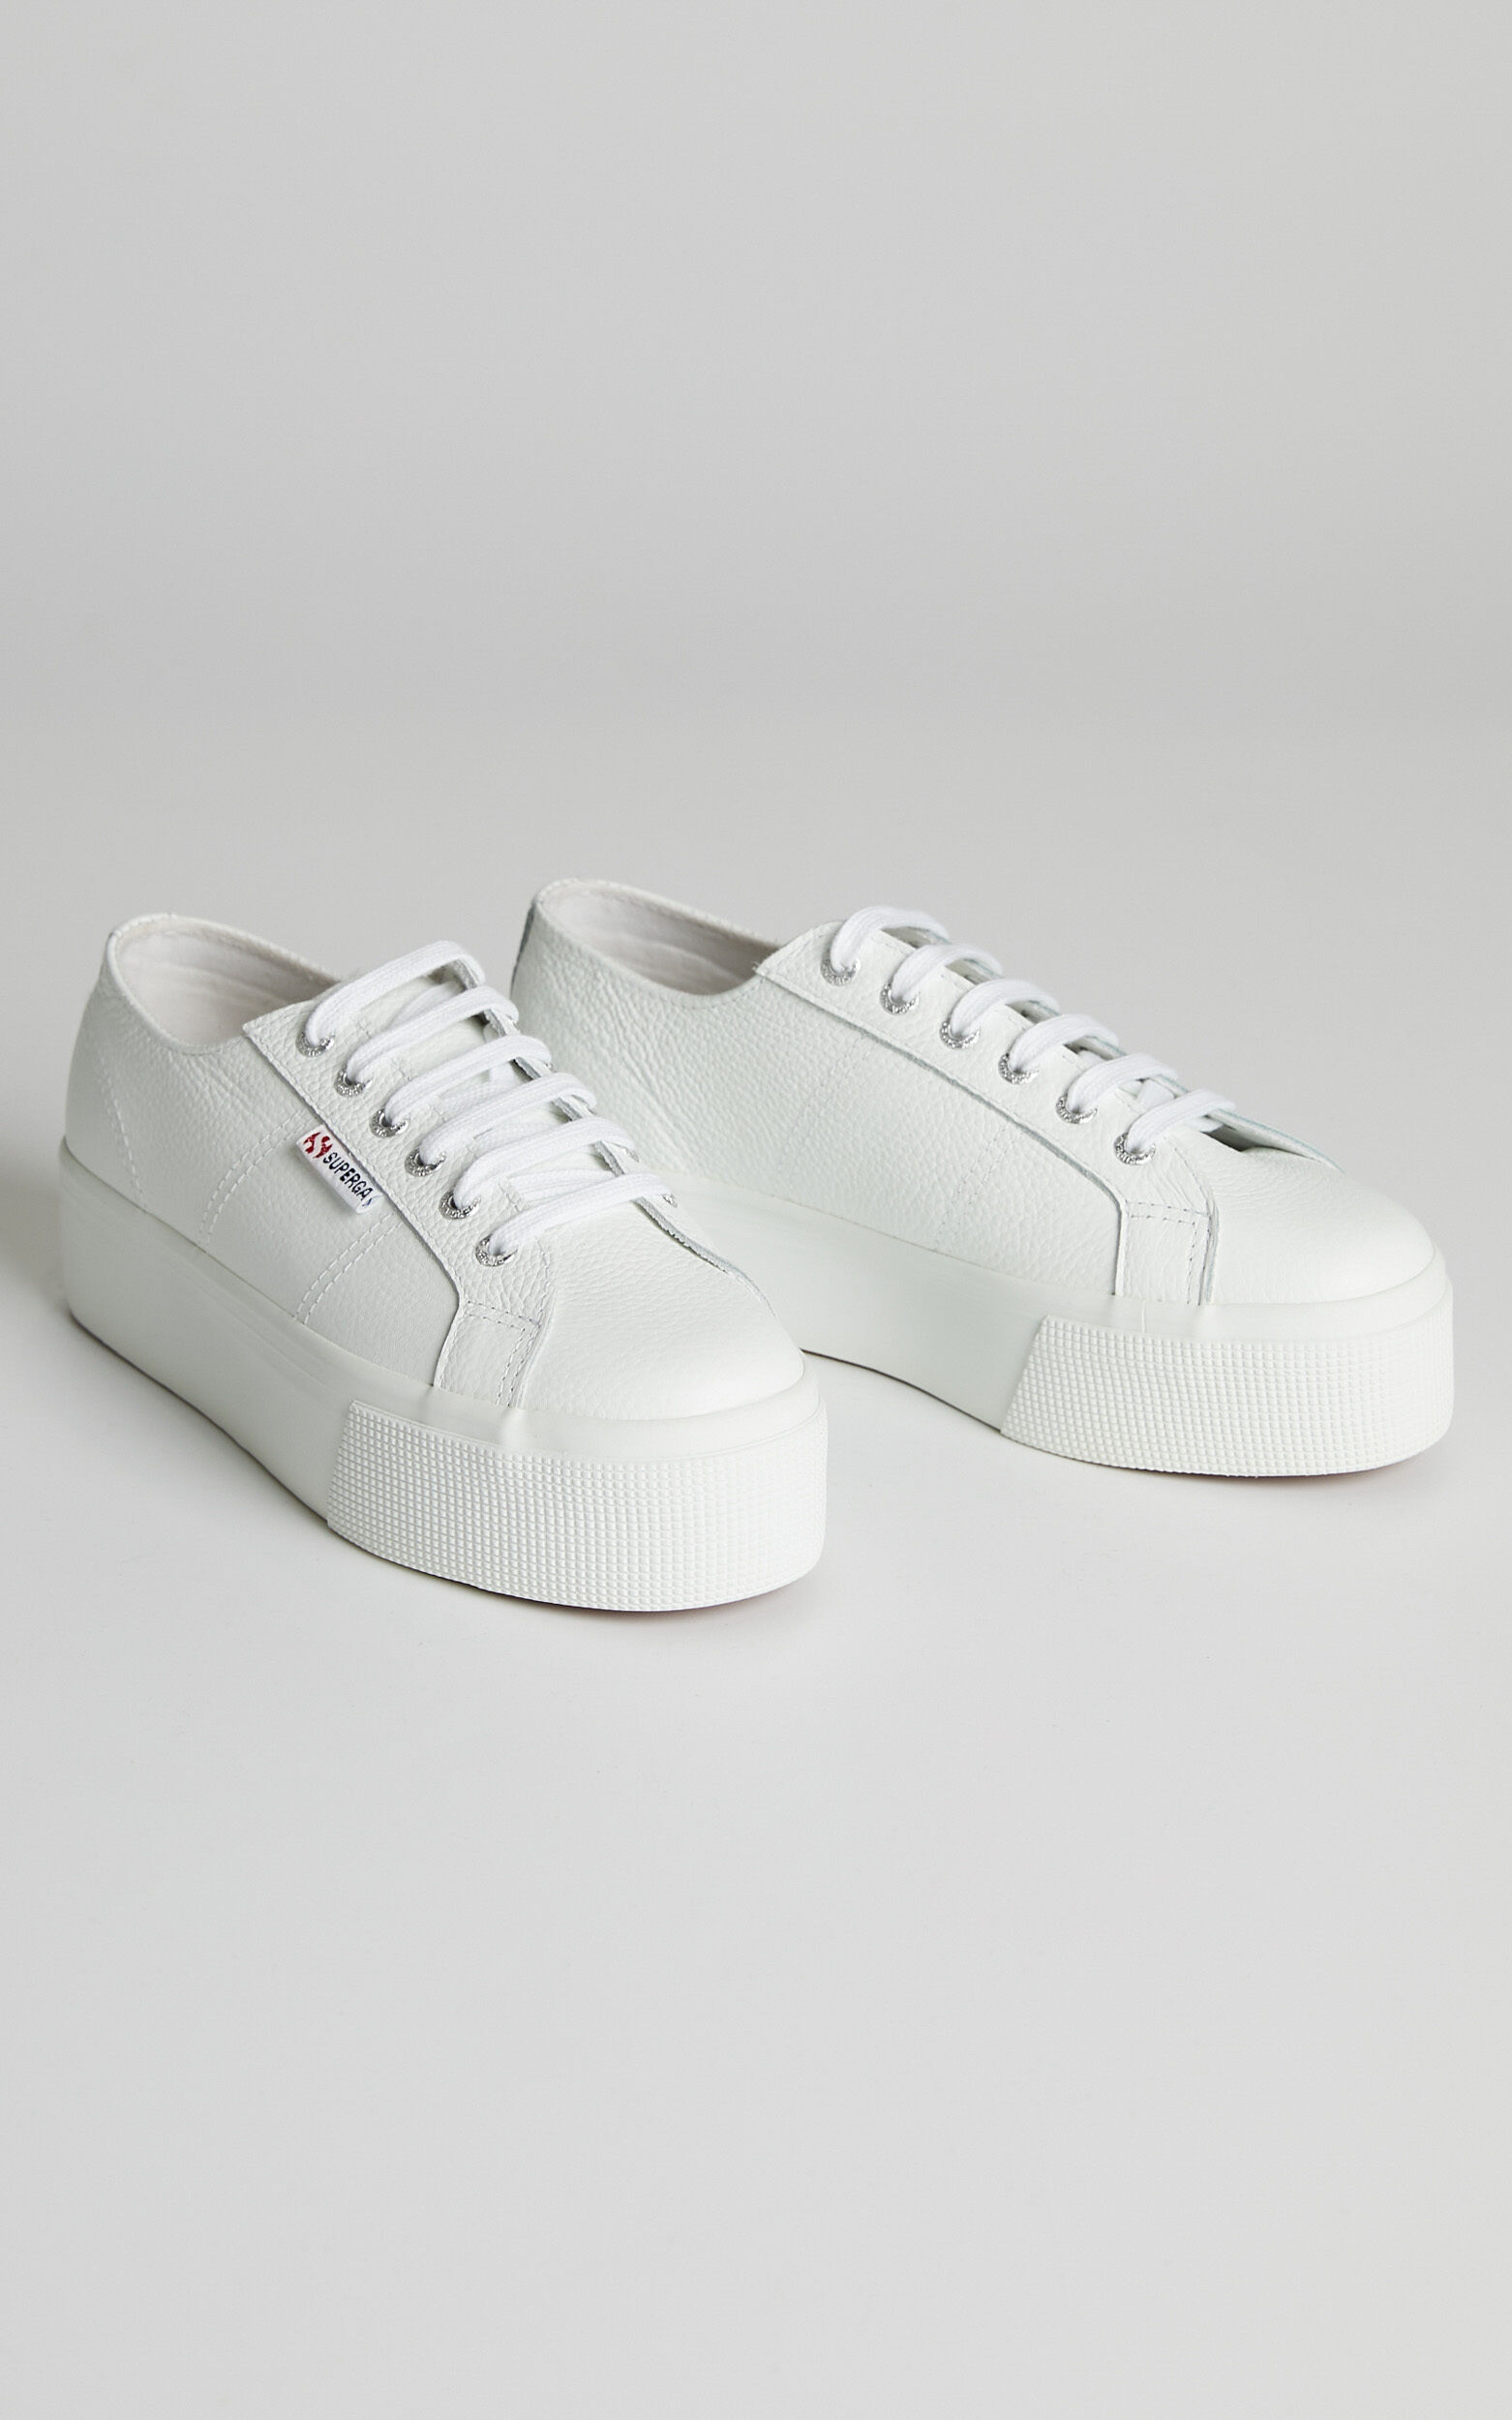 Superga - 2790 Tumbled Leather Sneakers in White - 05, WHT1, super-hi-res image number null